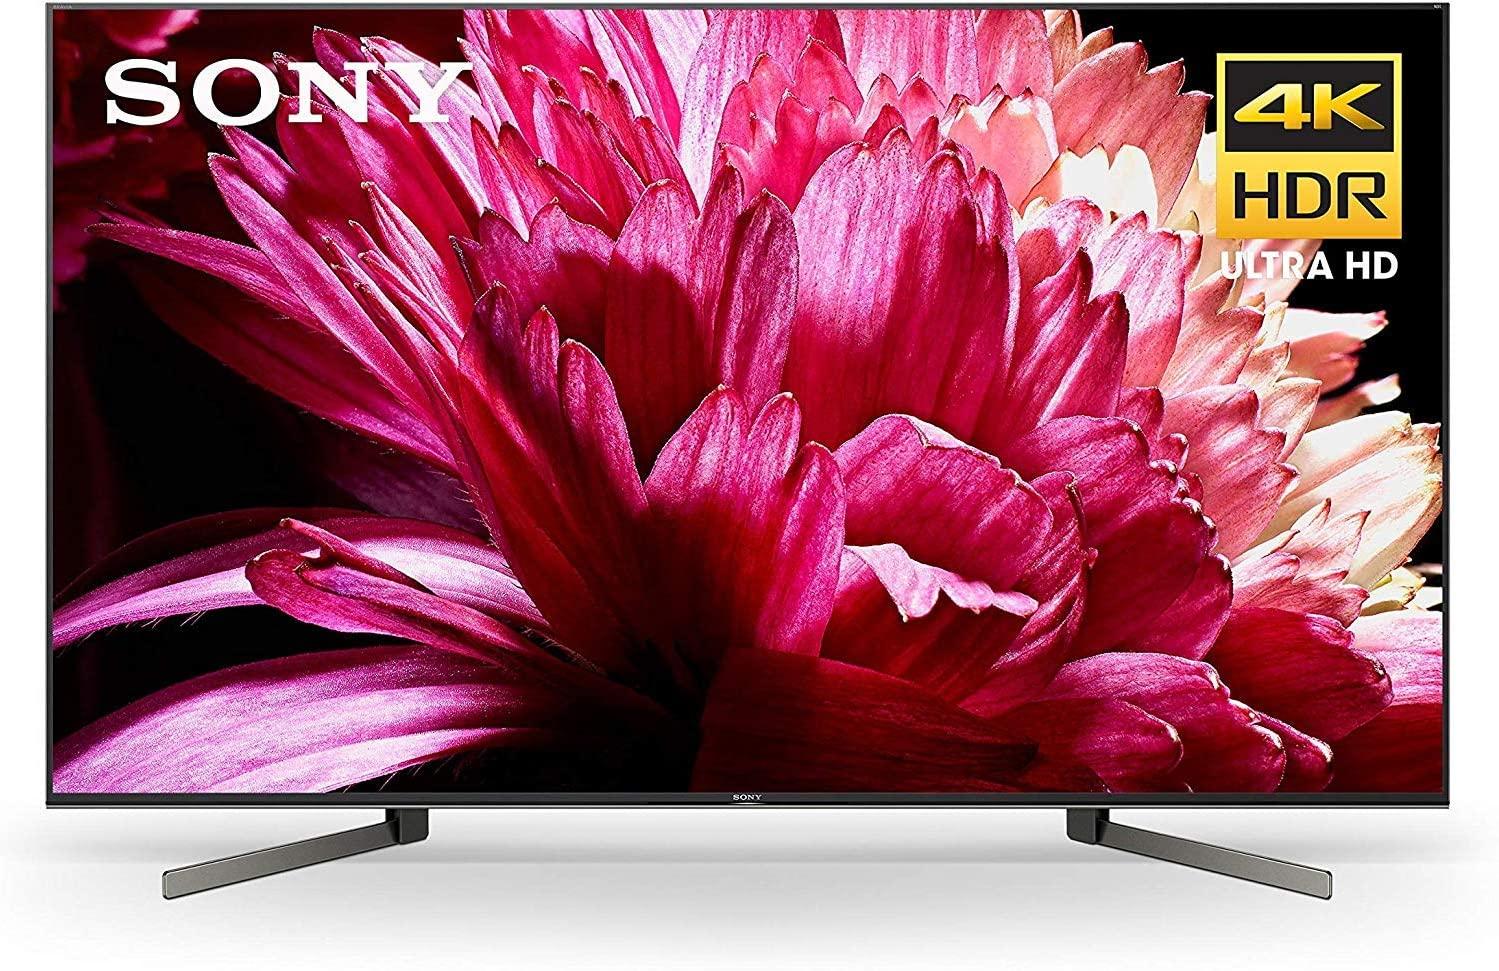 65in Sony X950G Series 4K UHD LED Smart TV for $1078 Shipped